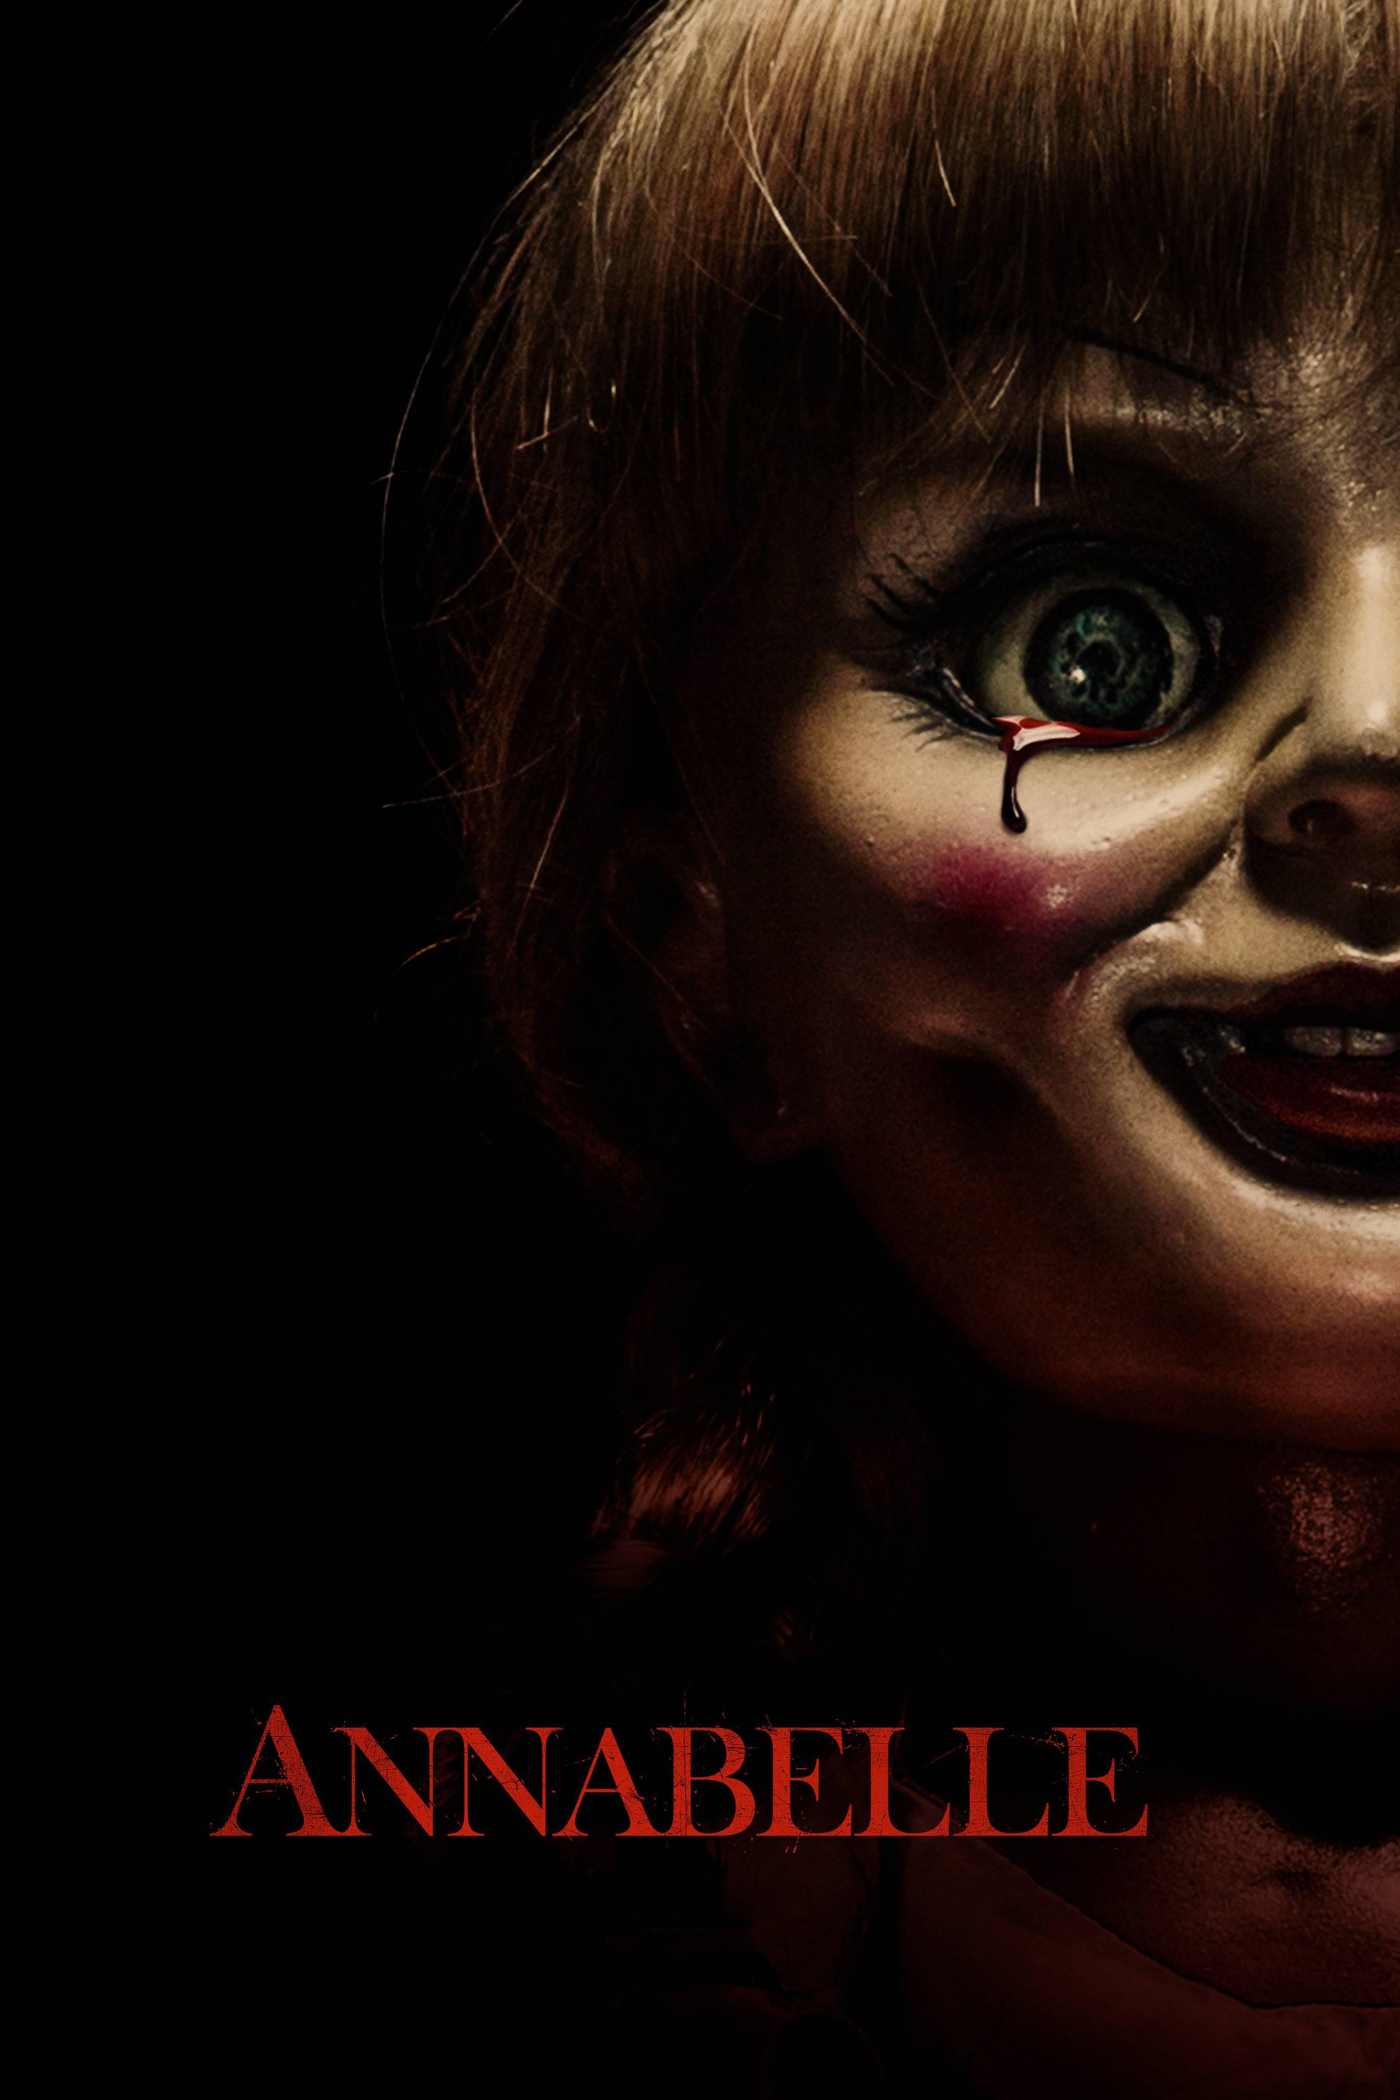 Poster for the movie "Annabelle"